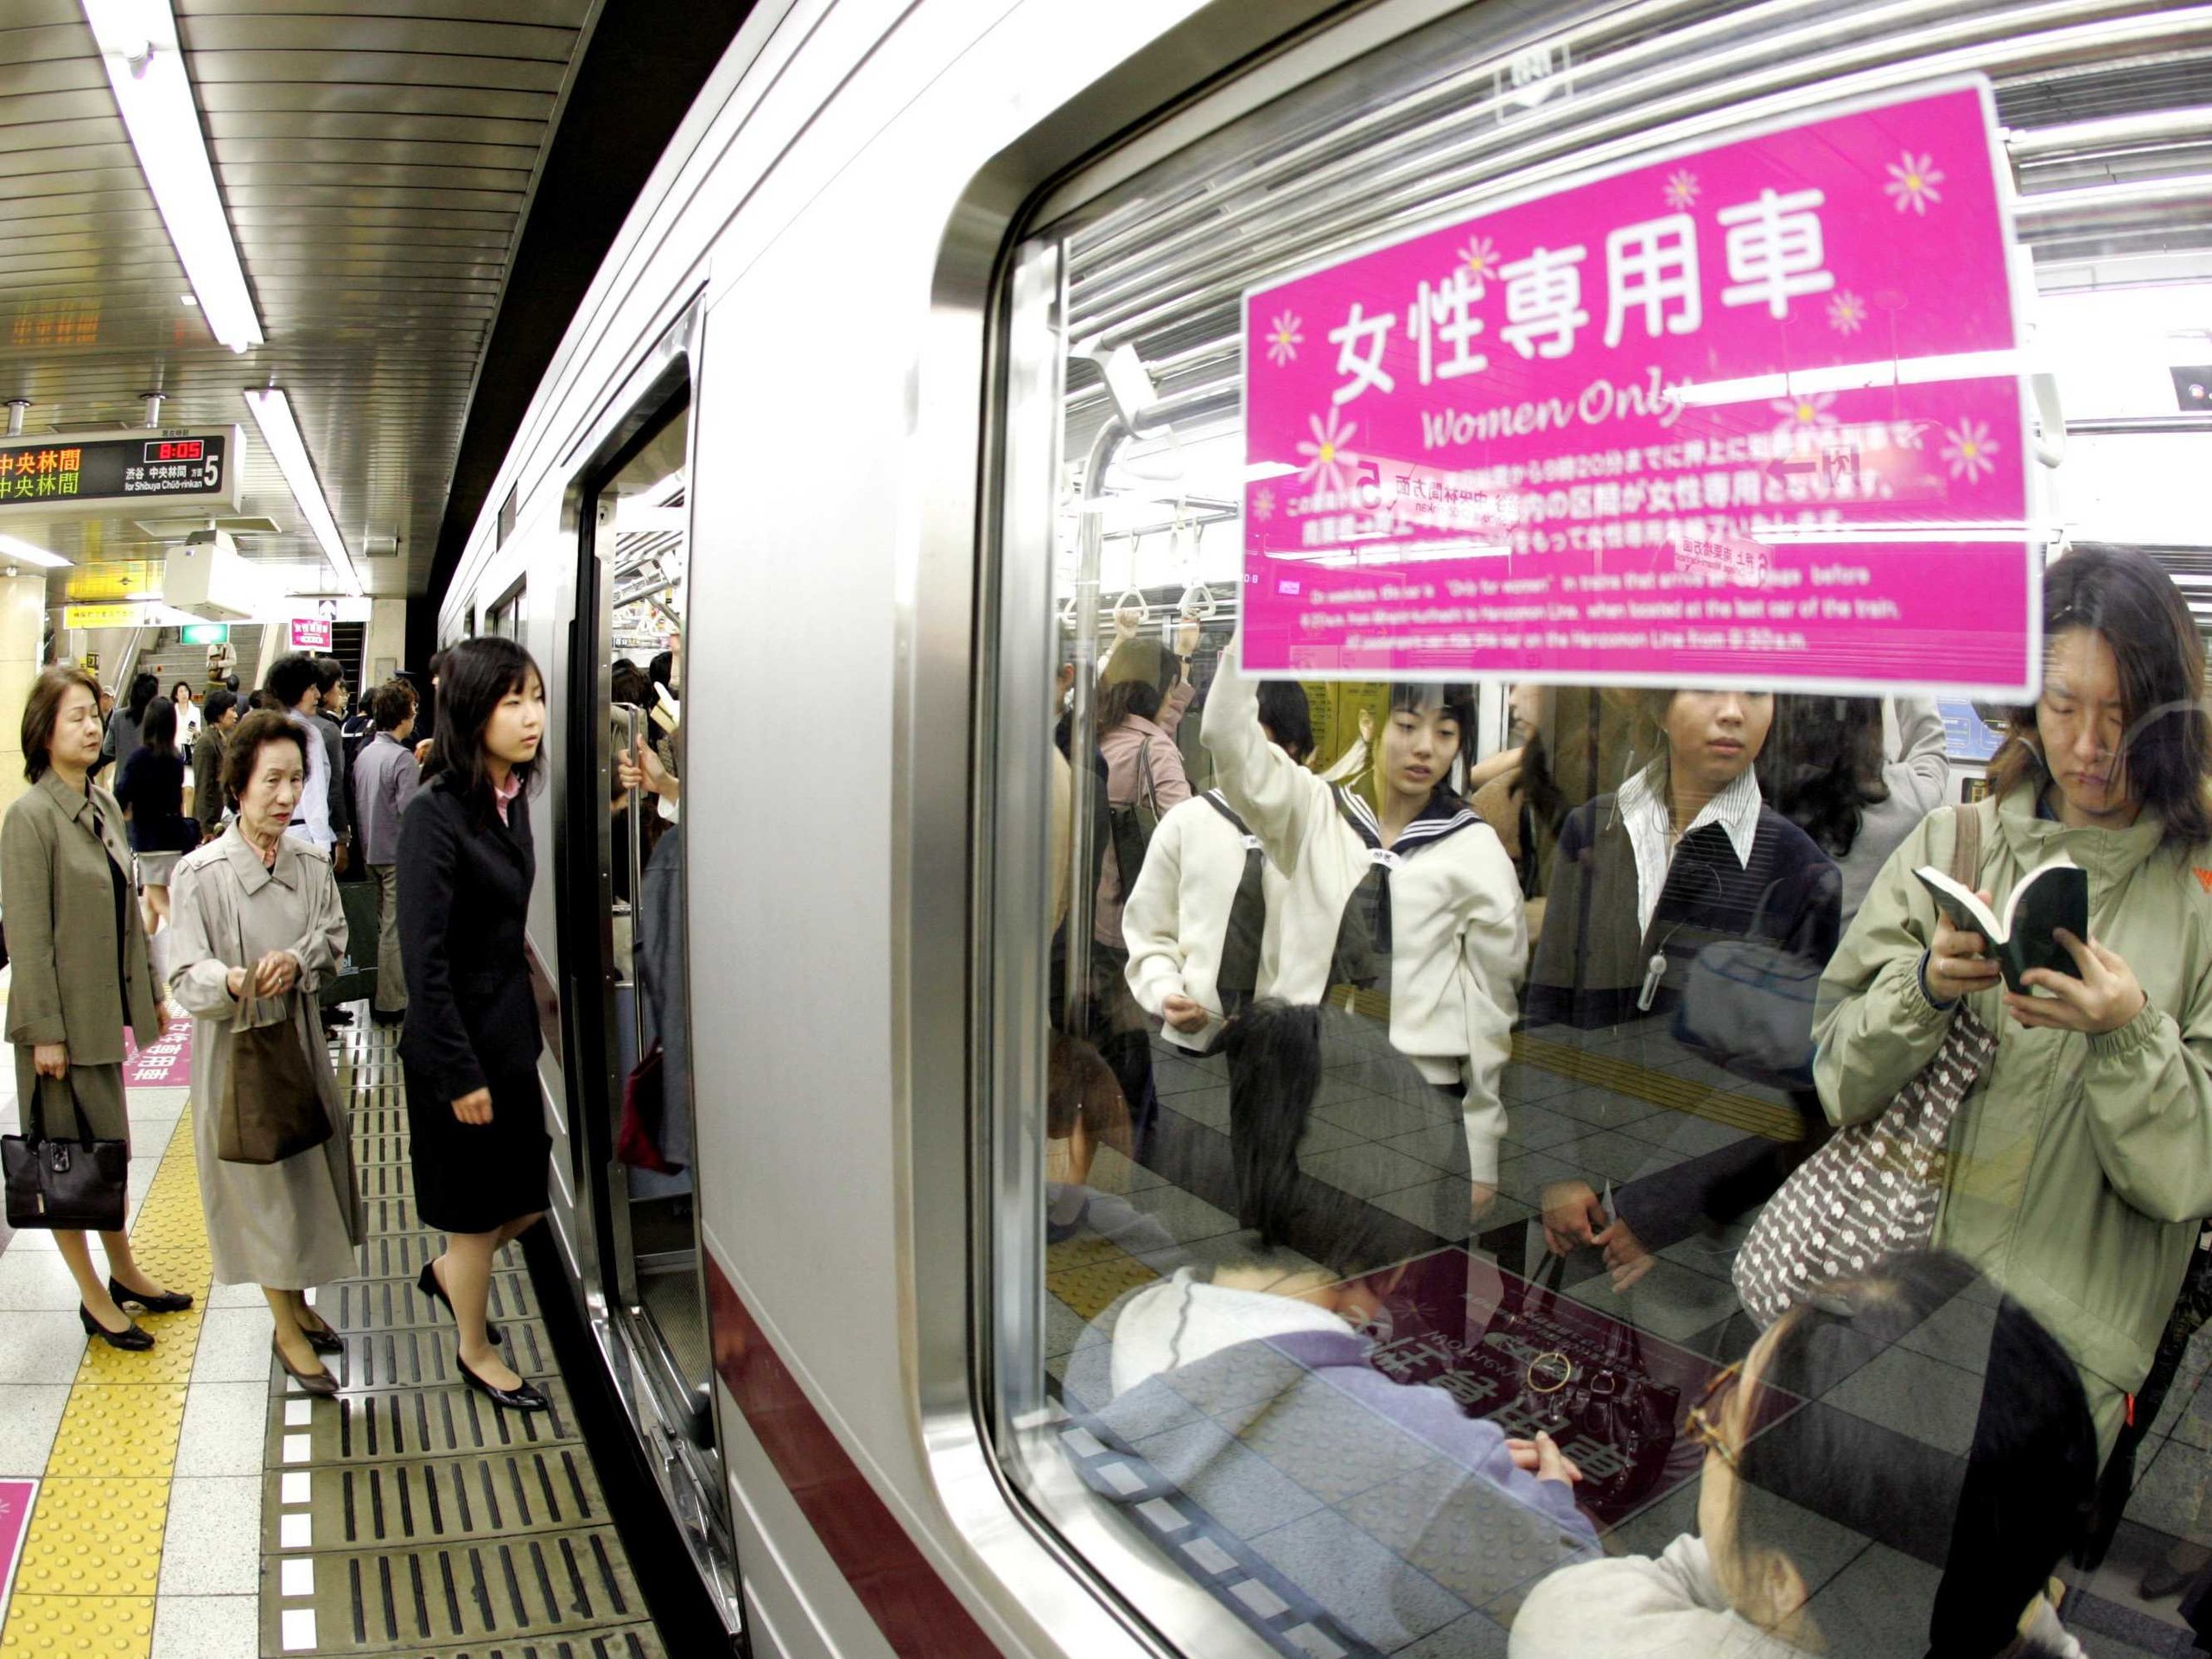 10 terrifying stories about riding trains in Japan - Business Insider